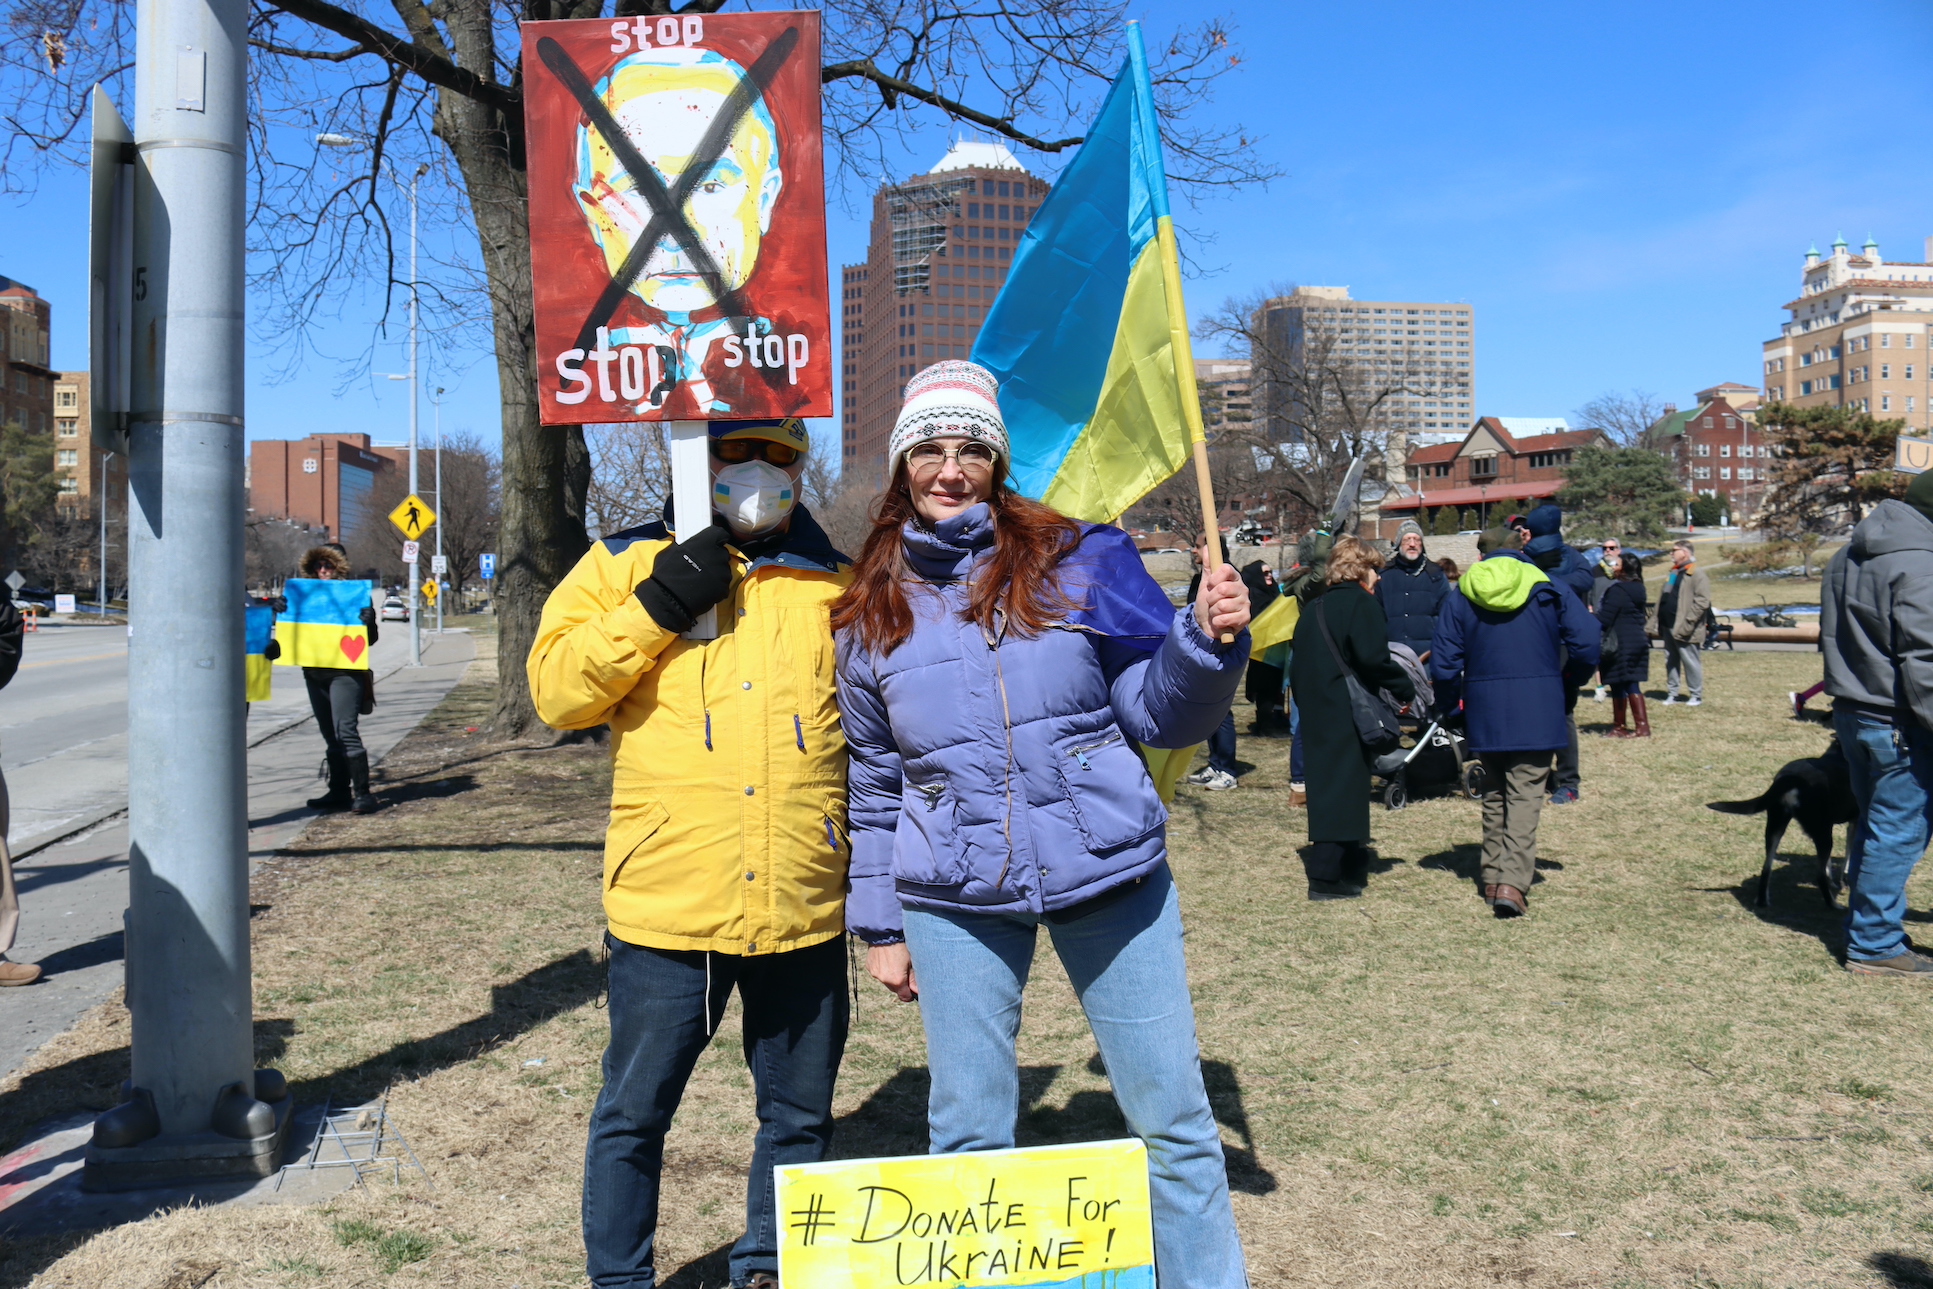 Man holds a sign that reads "stop" with a painting of Vladimir Putin with a big "x' over his face. Woman stands next to him holding a Ukrainian flag.